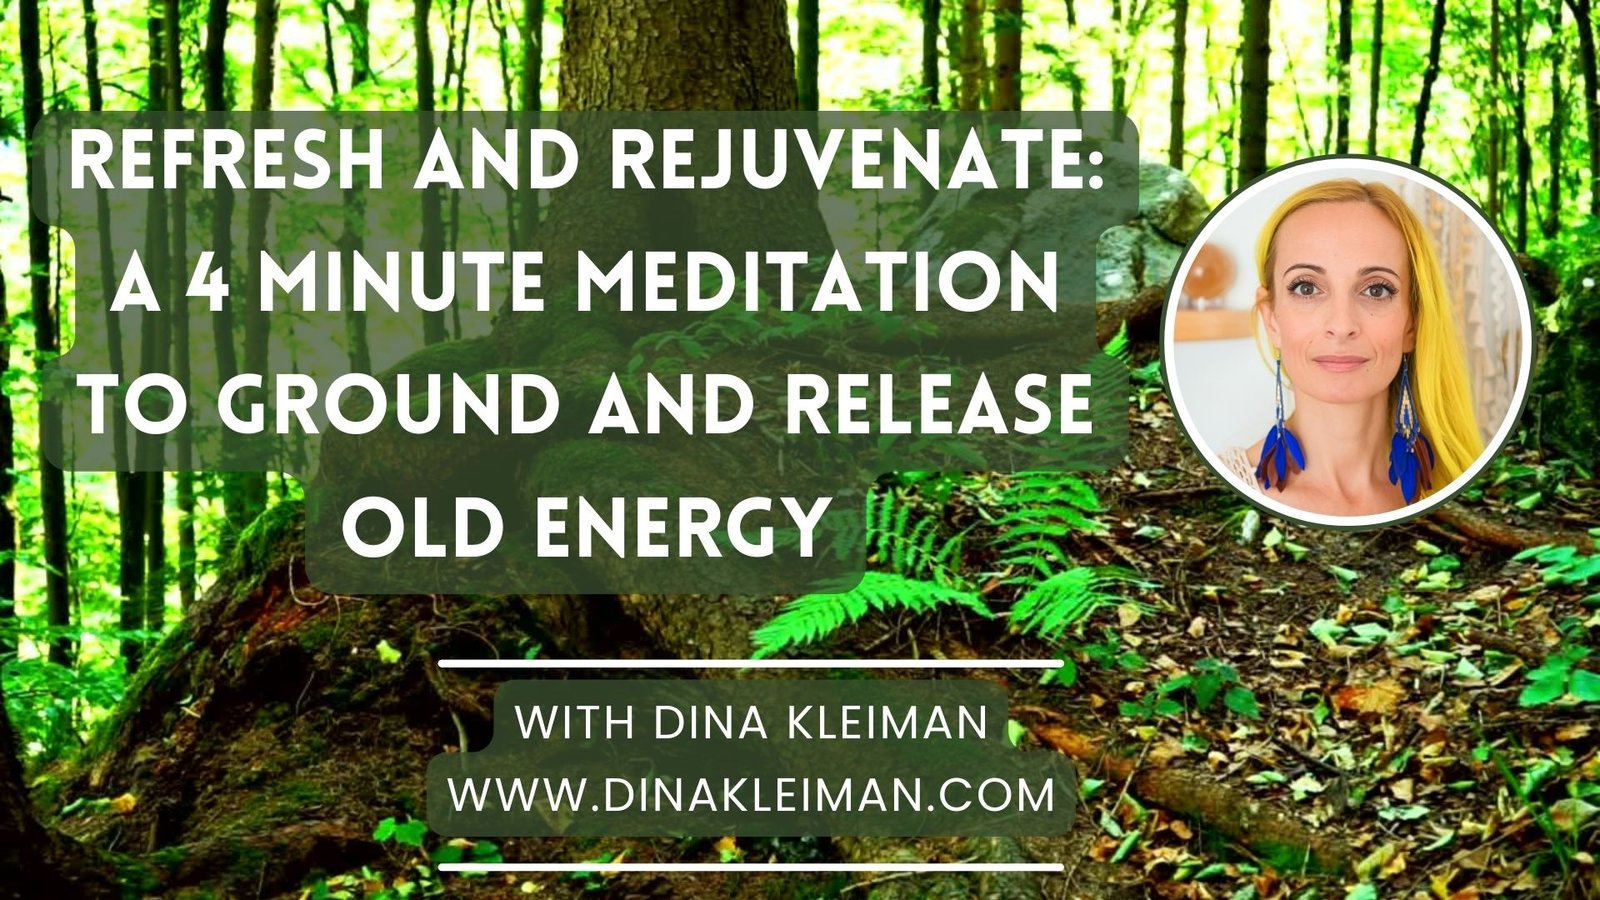 4-minute guided meditation to ground and release old energy - Dina Kleiman